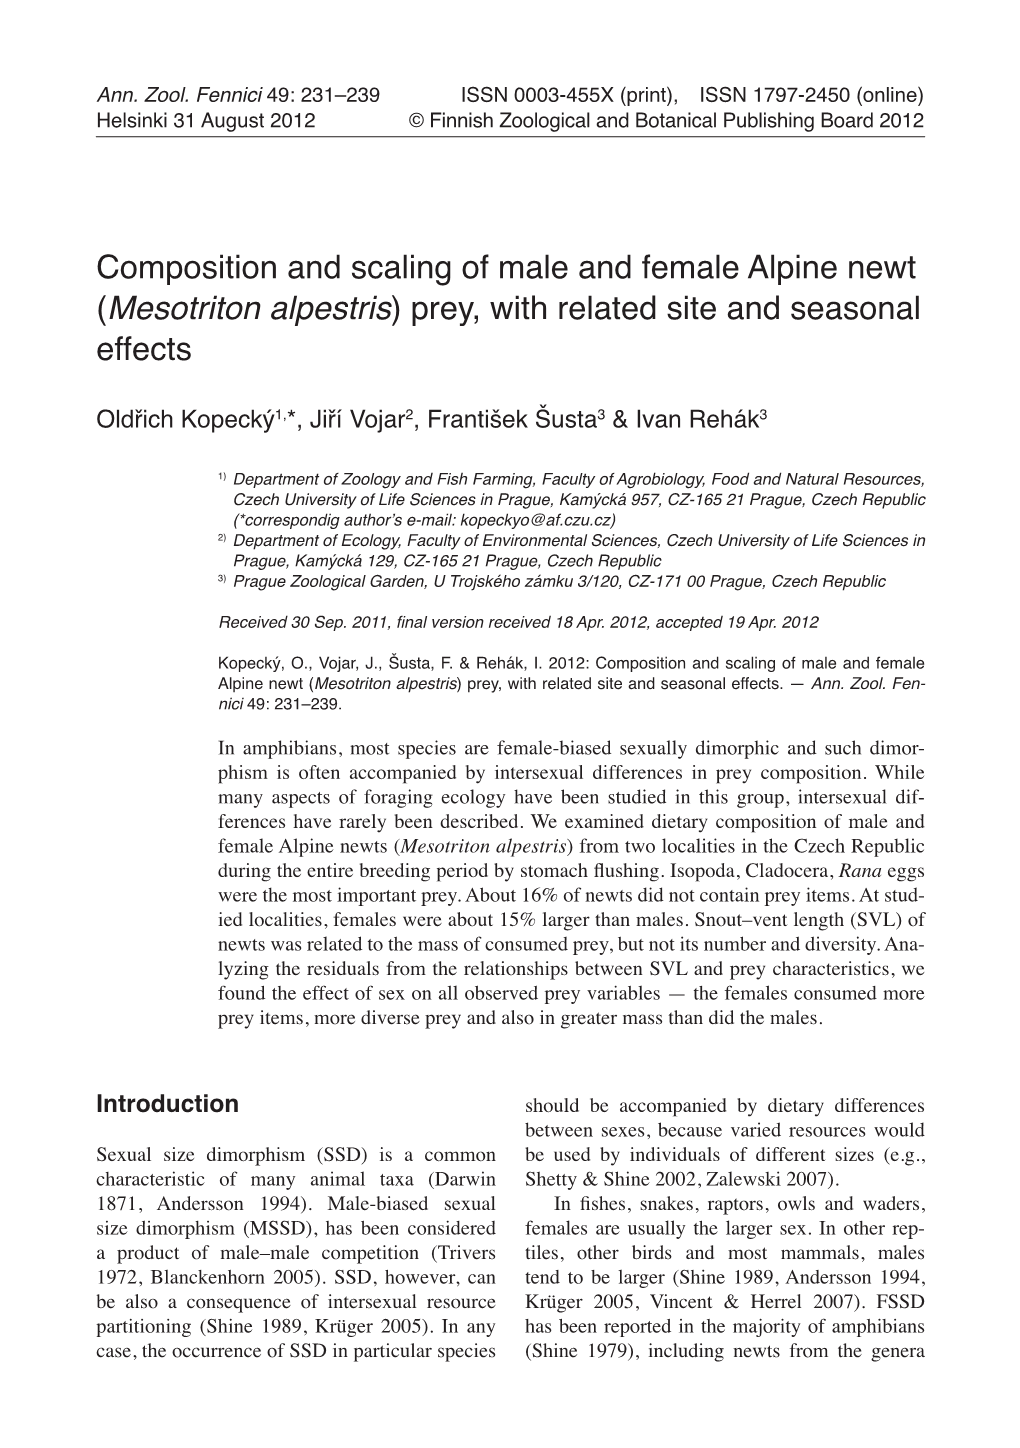 Composition and Scaling of Male and Female Alpine Newt (Mesotriton Alpestris) Prey, with Related Site and Seasonal Effects